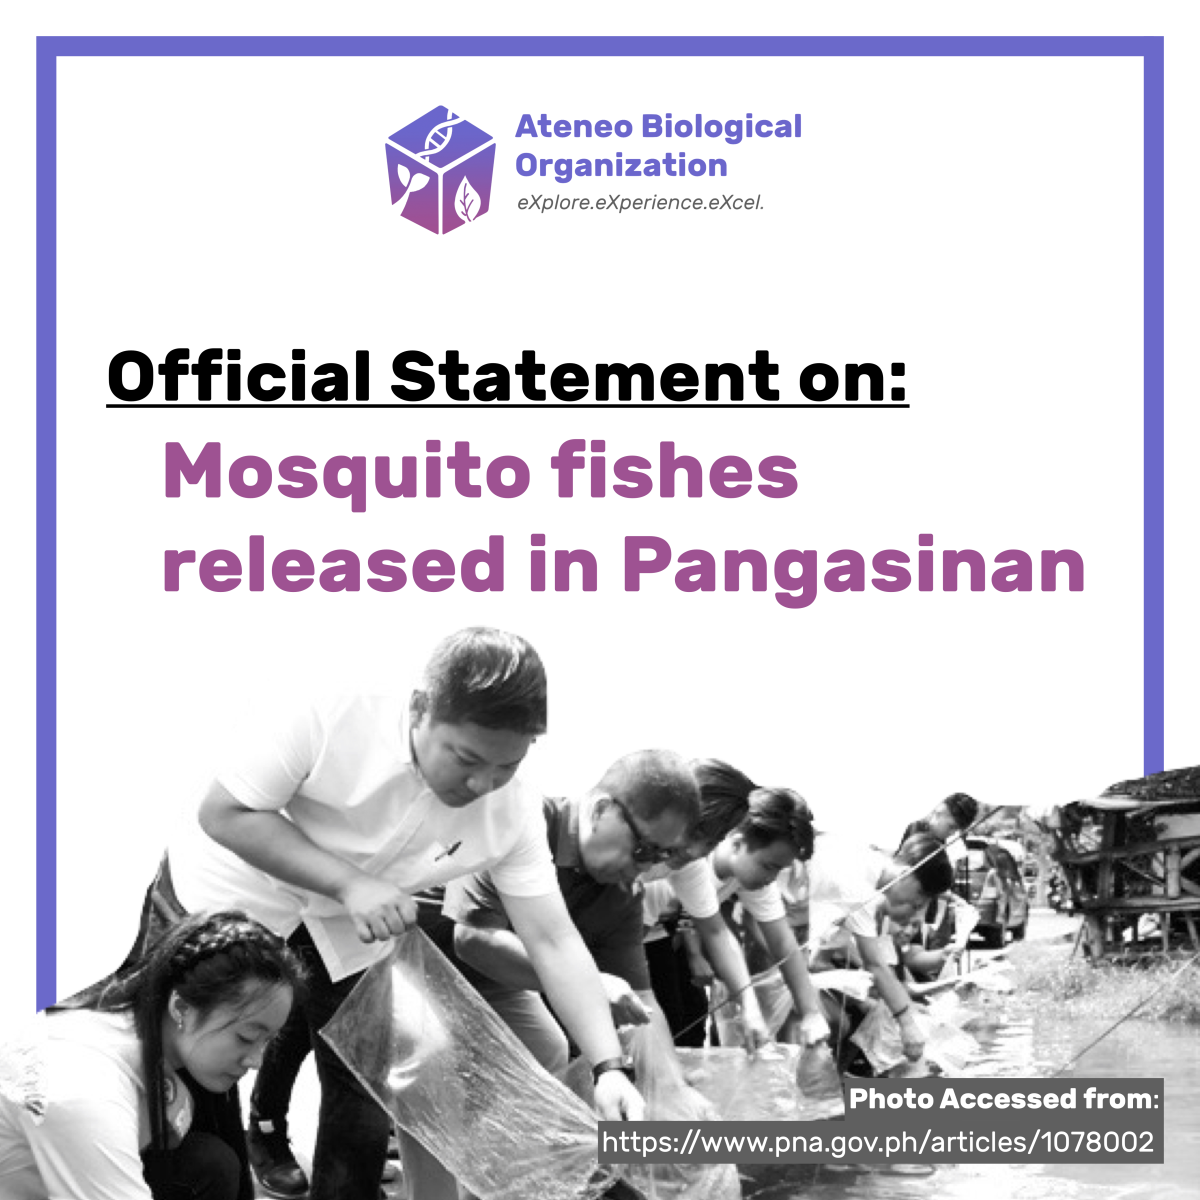 Official Statement on: Mosquito fishes released in Pangasinan